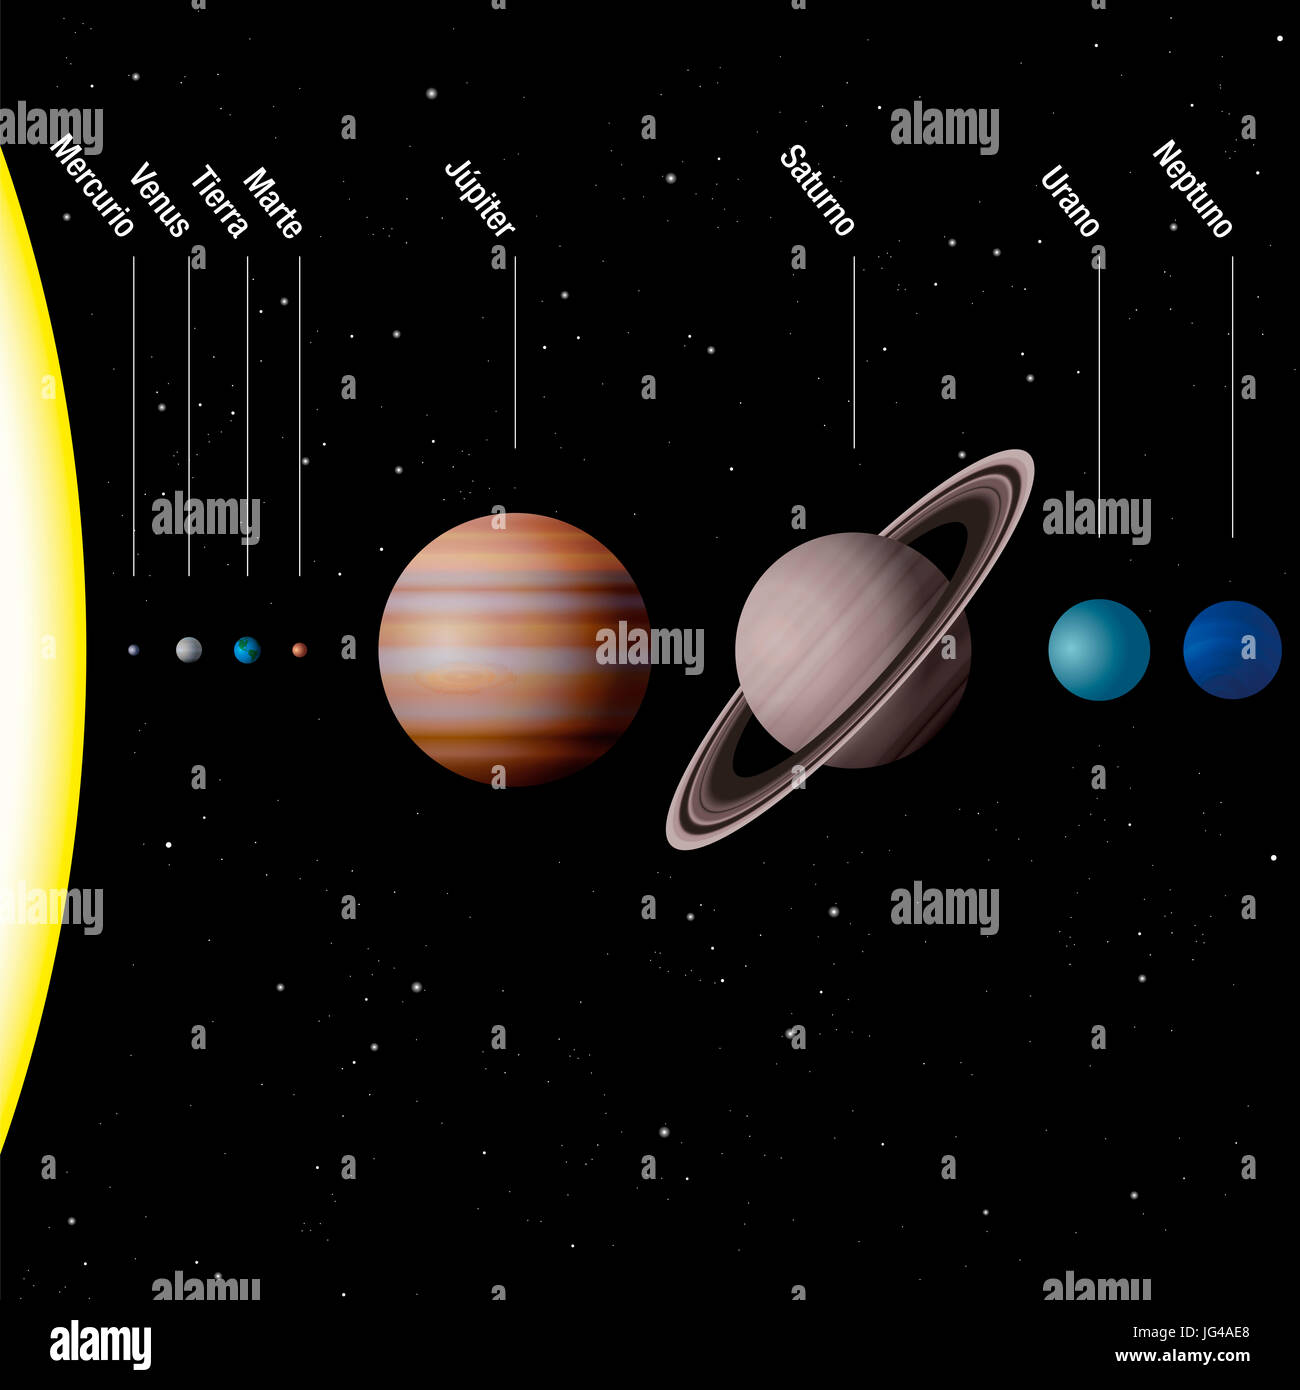 Names Of The Eight Planets